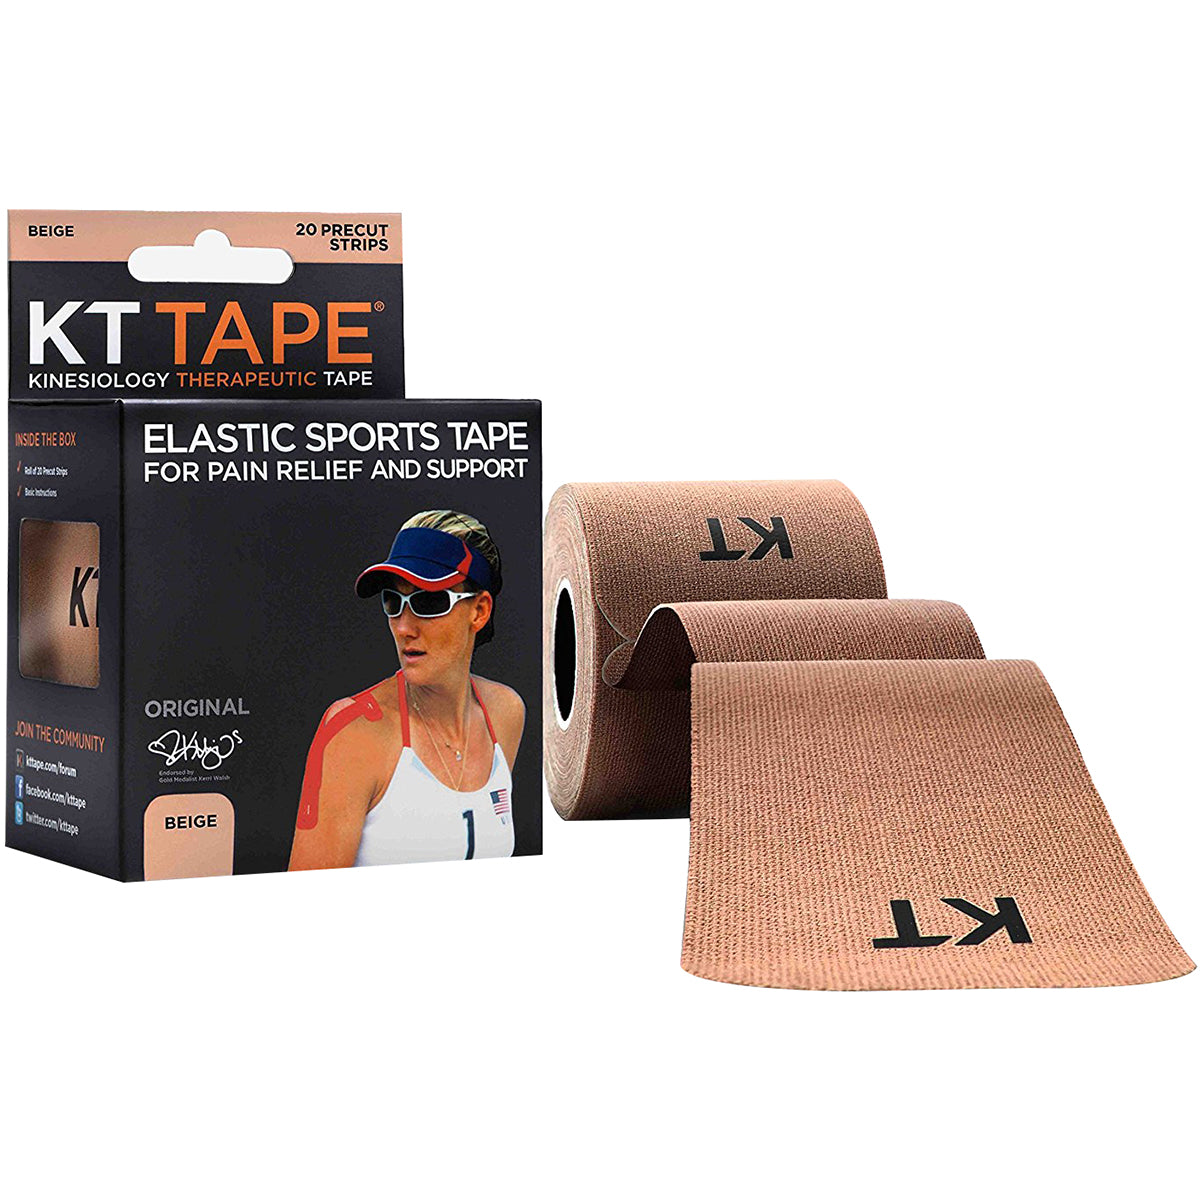 KT Tape Cotton 10" Precut Kinesiology Therapeutic Sports Roll, 20 Strips, Beige KT Tape